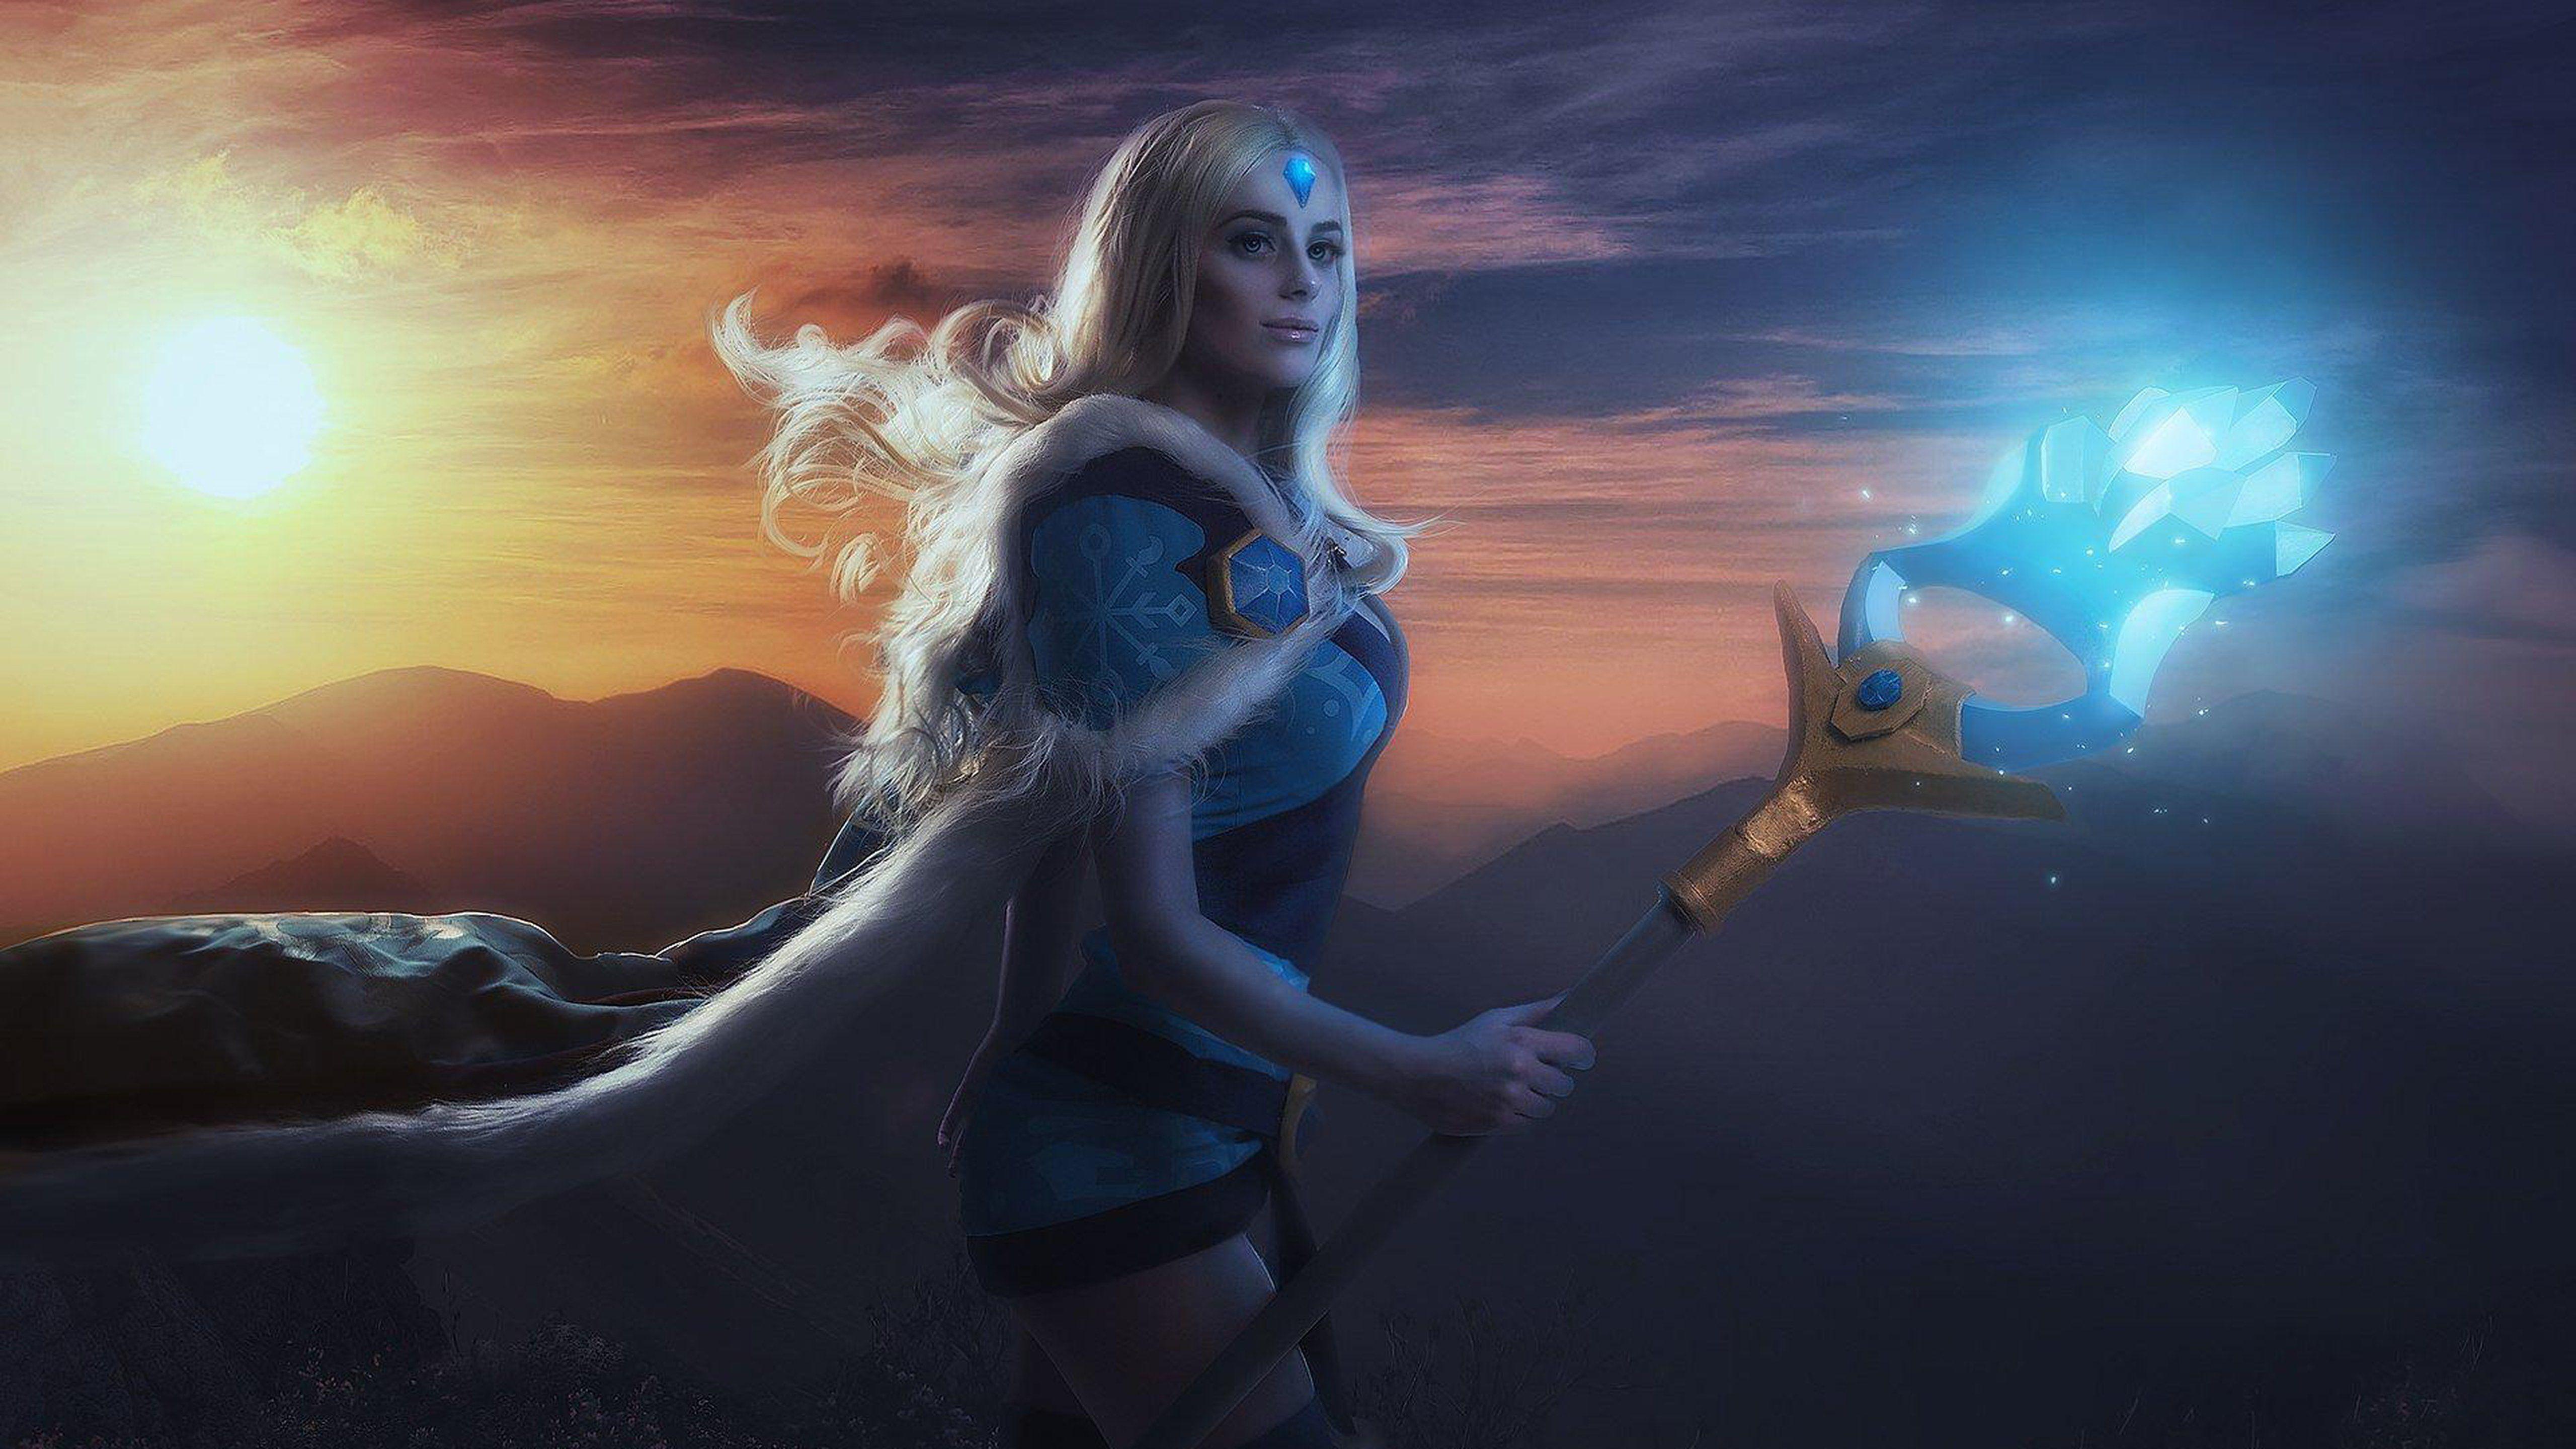 5K/UHD+ Dota 2 Crystal Maiden Wallpapers : Games Wallpapers for Phone